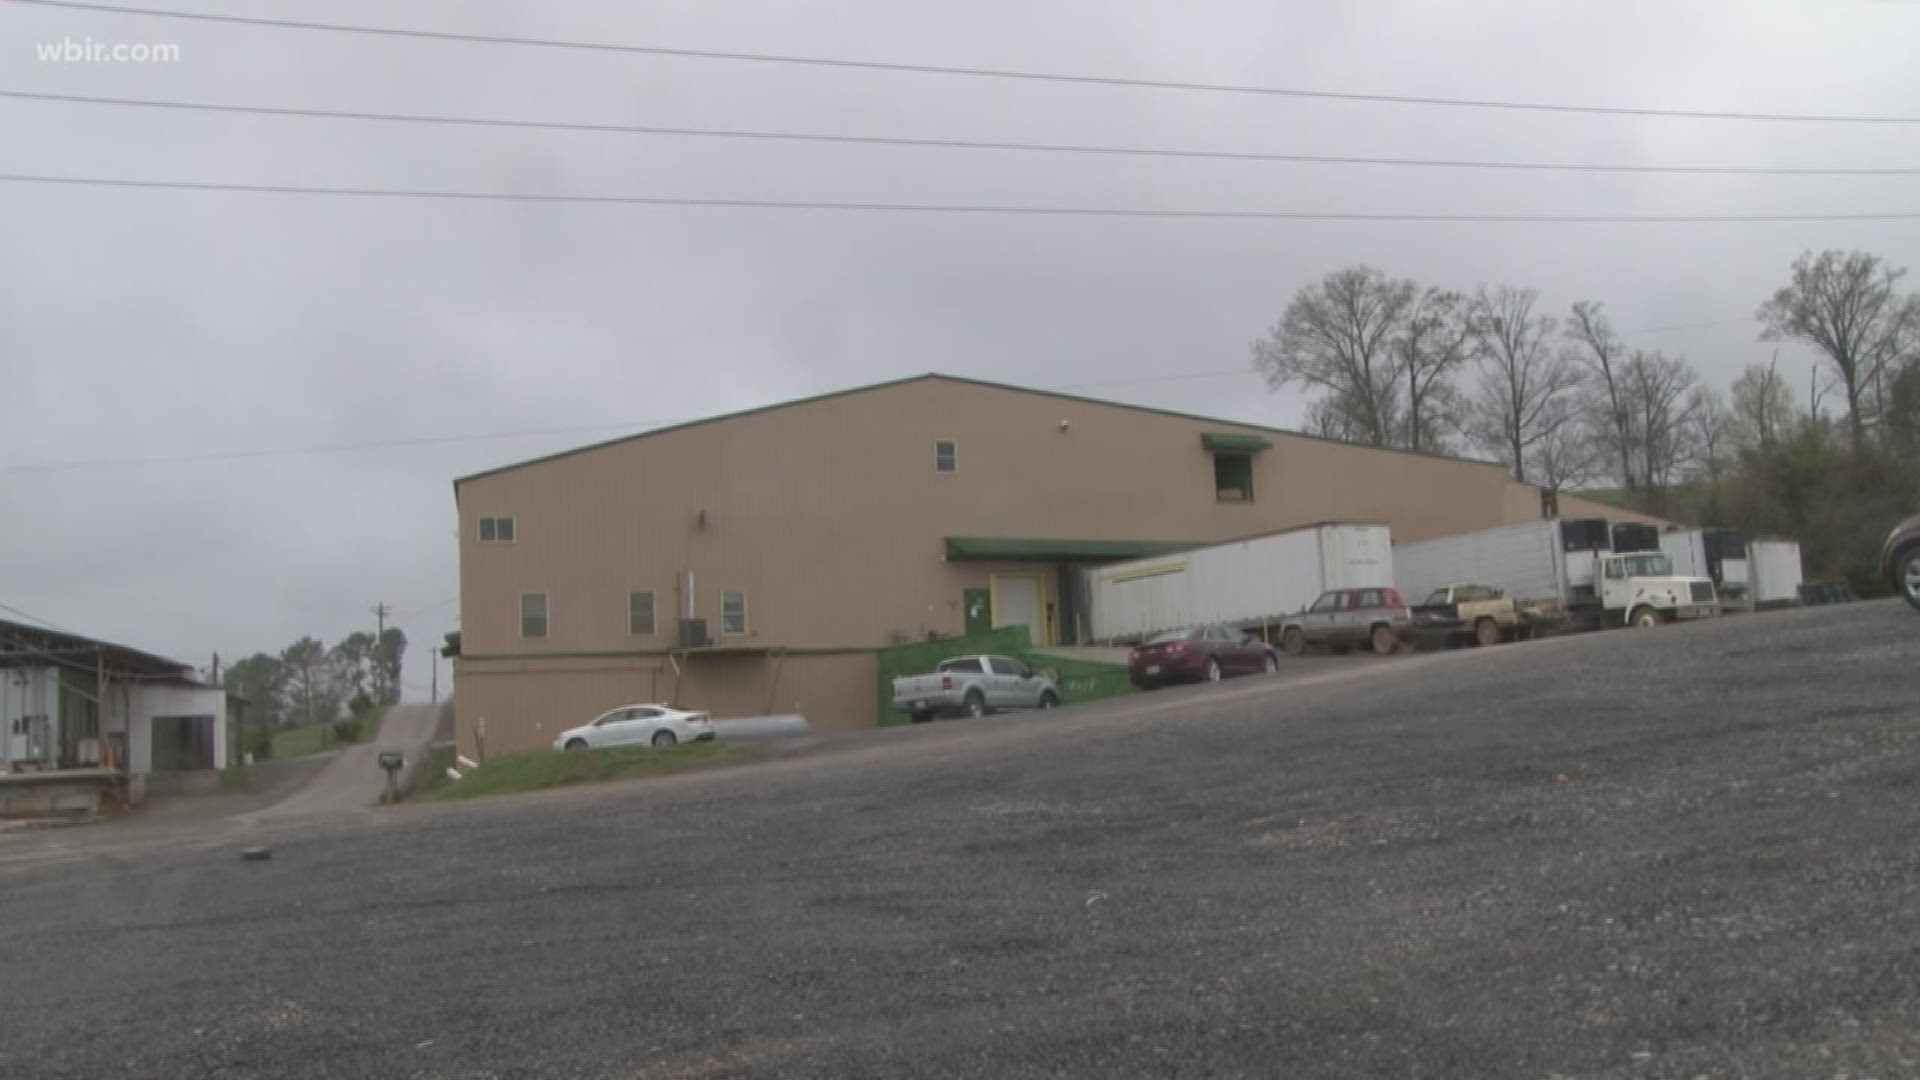 According to court documents, the owner of a Grainger Co. meatpacking plant pleaded guilty to charges stemming from an ICE raid on Thursday.